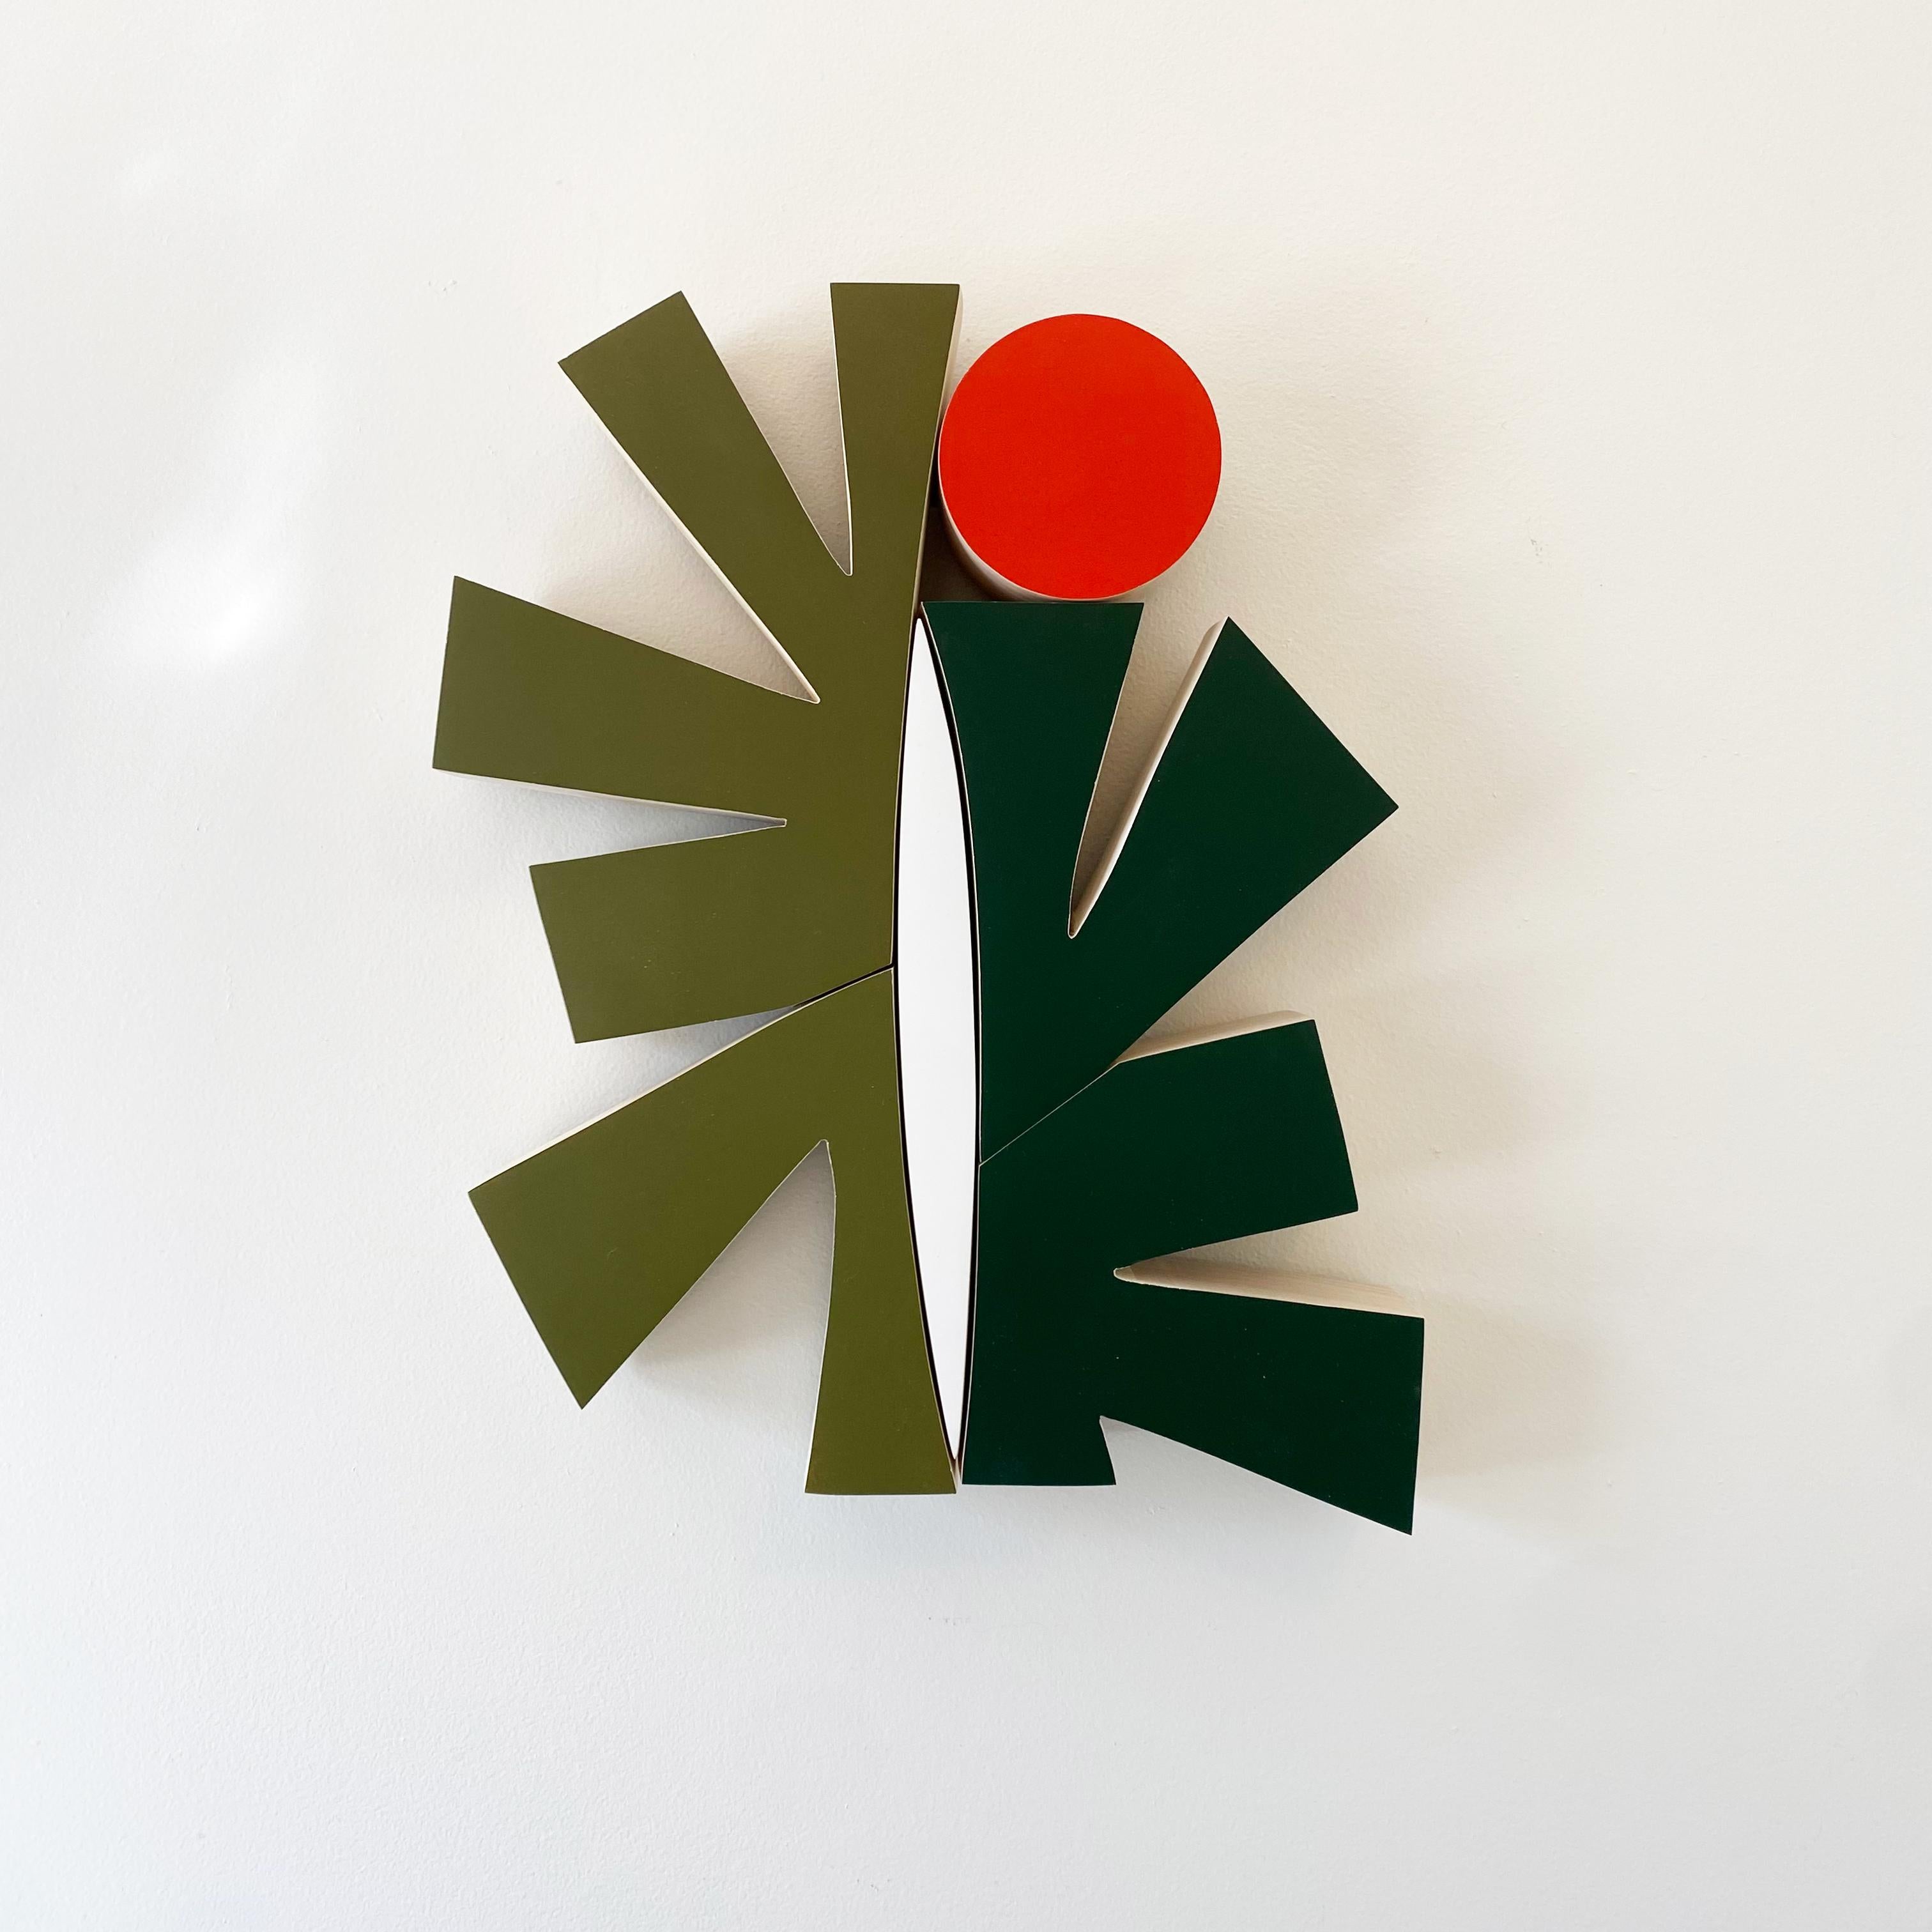 Artwork made with spray acrylic on poplar with matte clearcoat

Small Pop series are minimalist driven, wood wall sculptures that are small and blocky and feature bright saturated colors. The pieces was inspired by my love for simple bold colors and